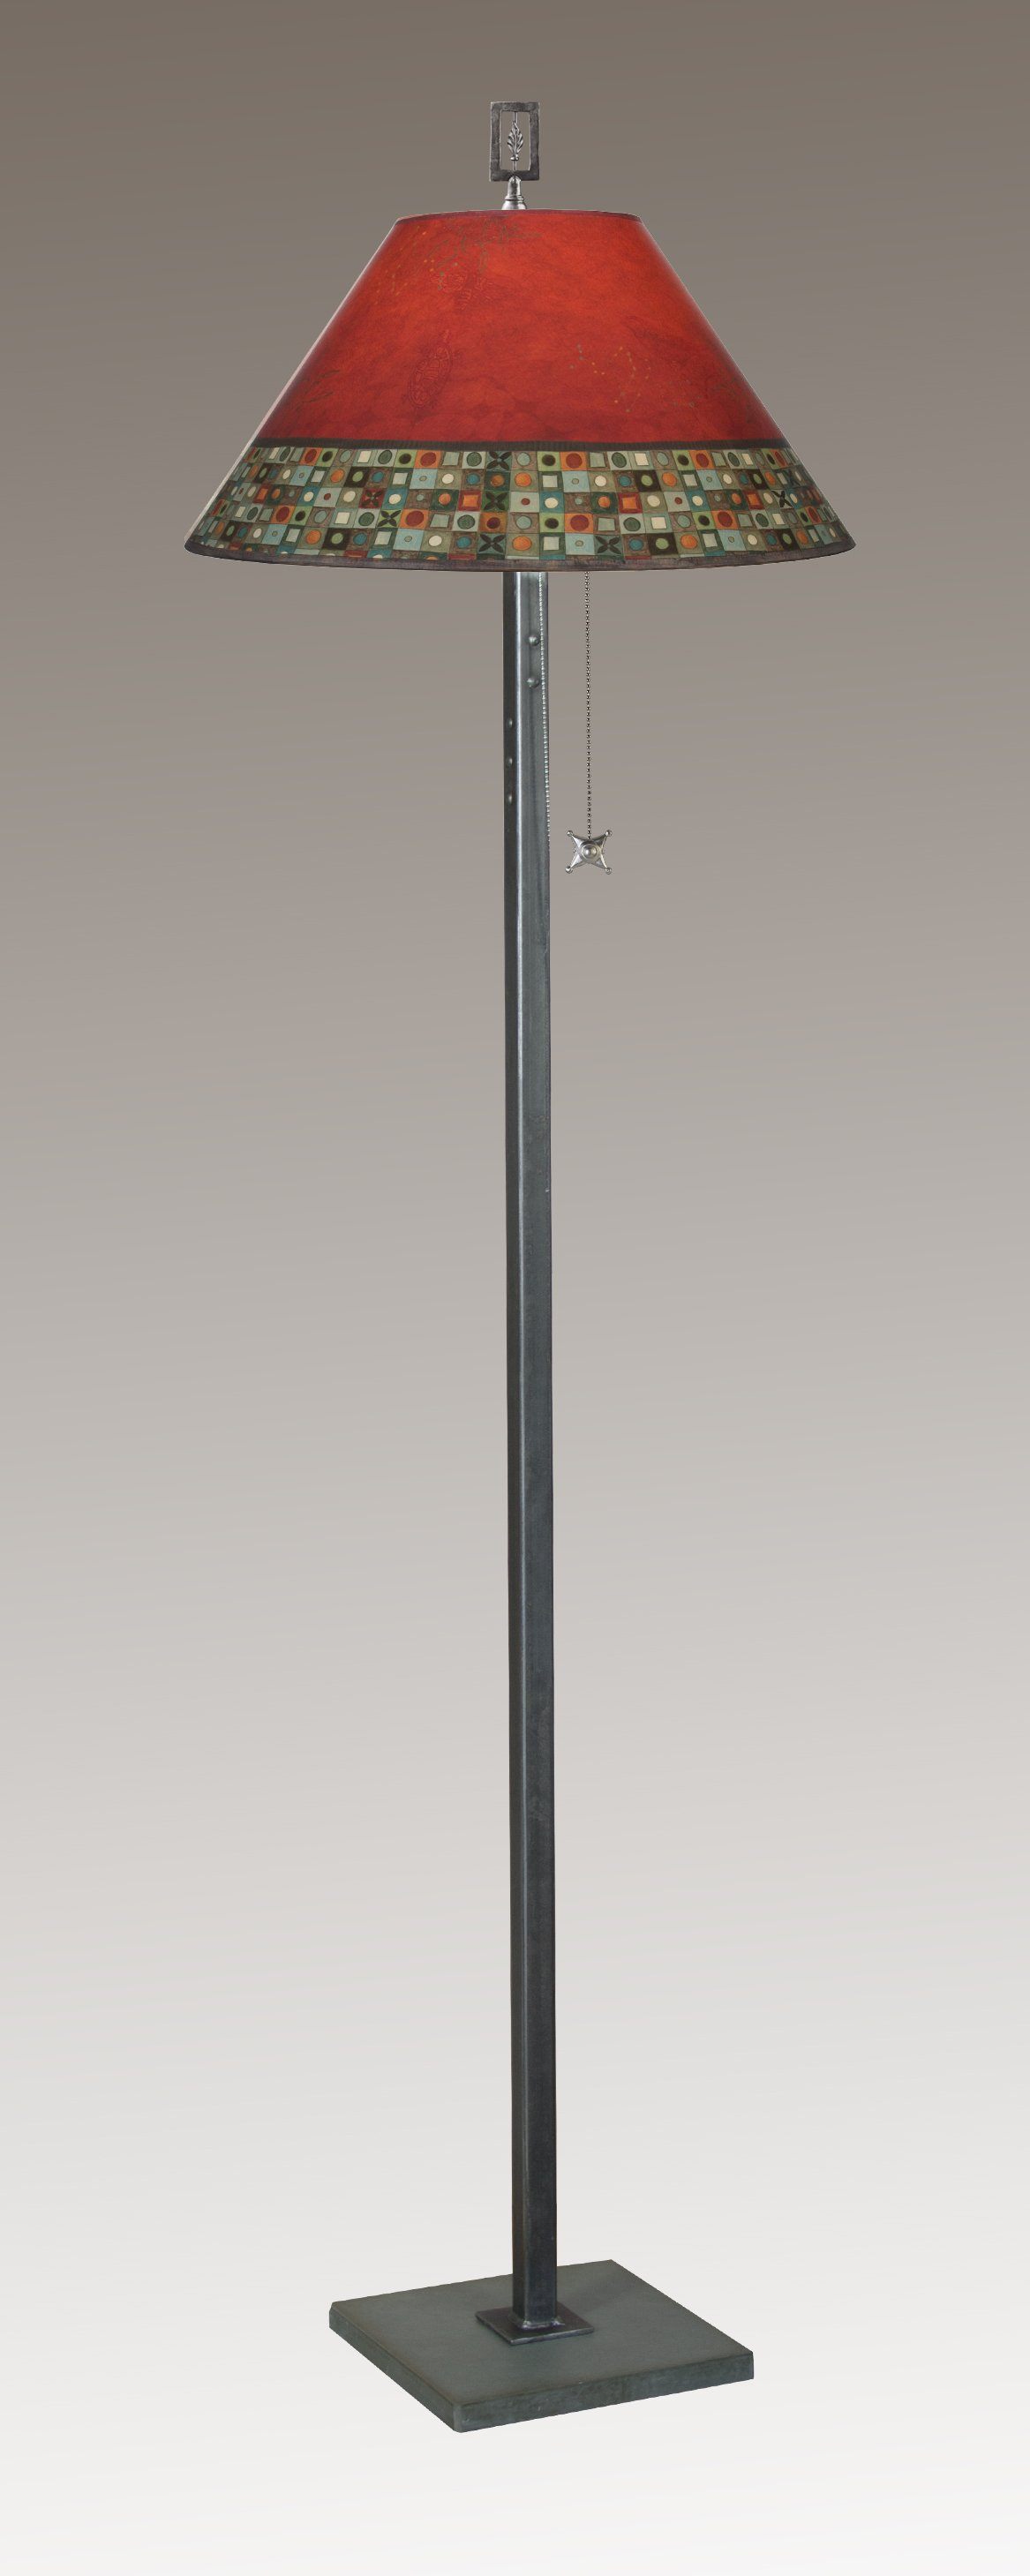 Steel Floor Lamp with Large Conical Shade in Red Mosaic